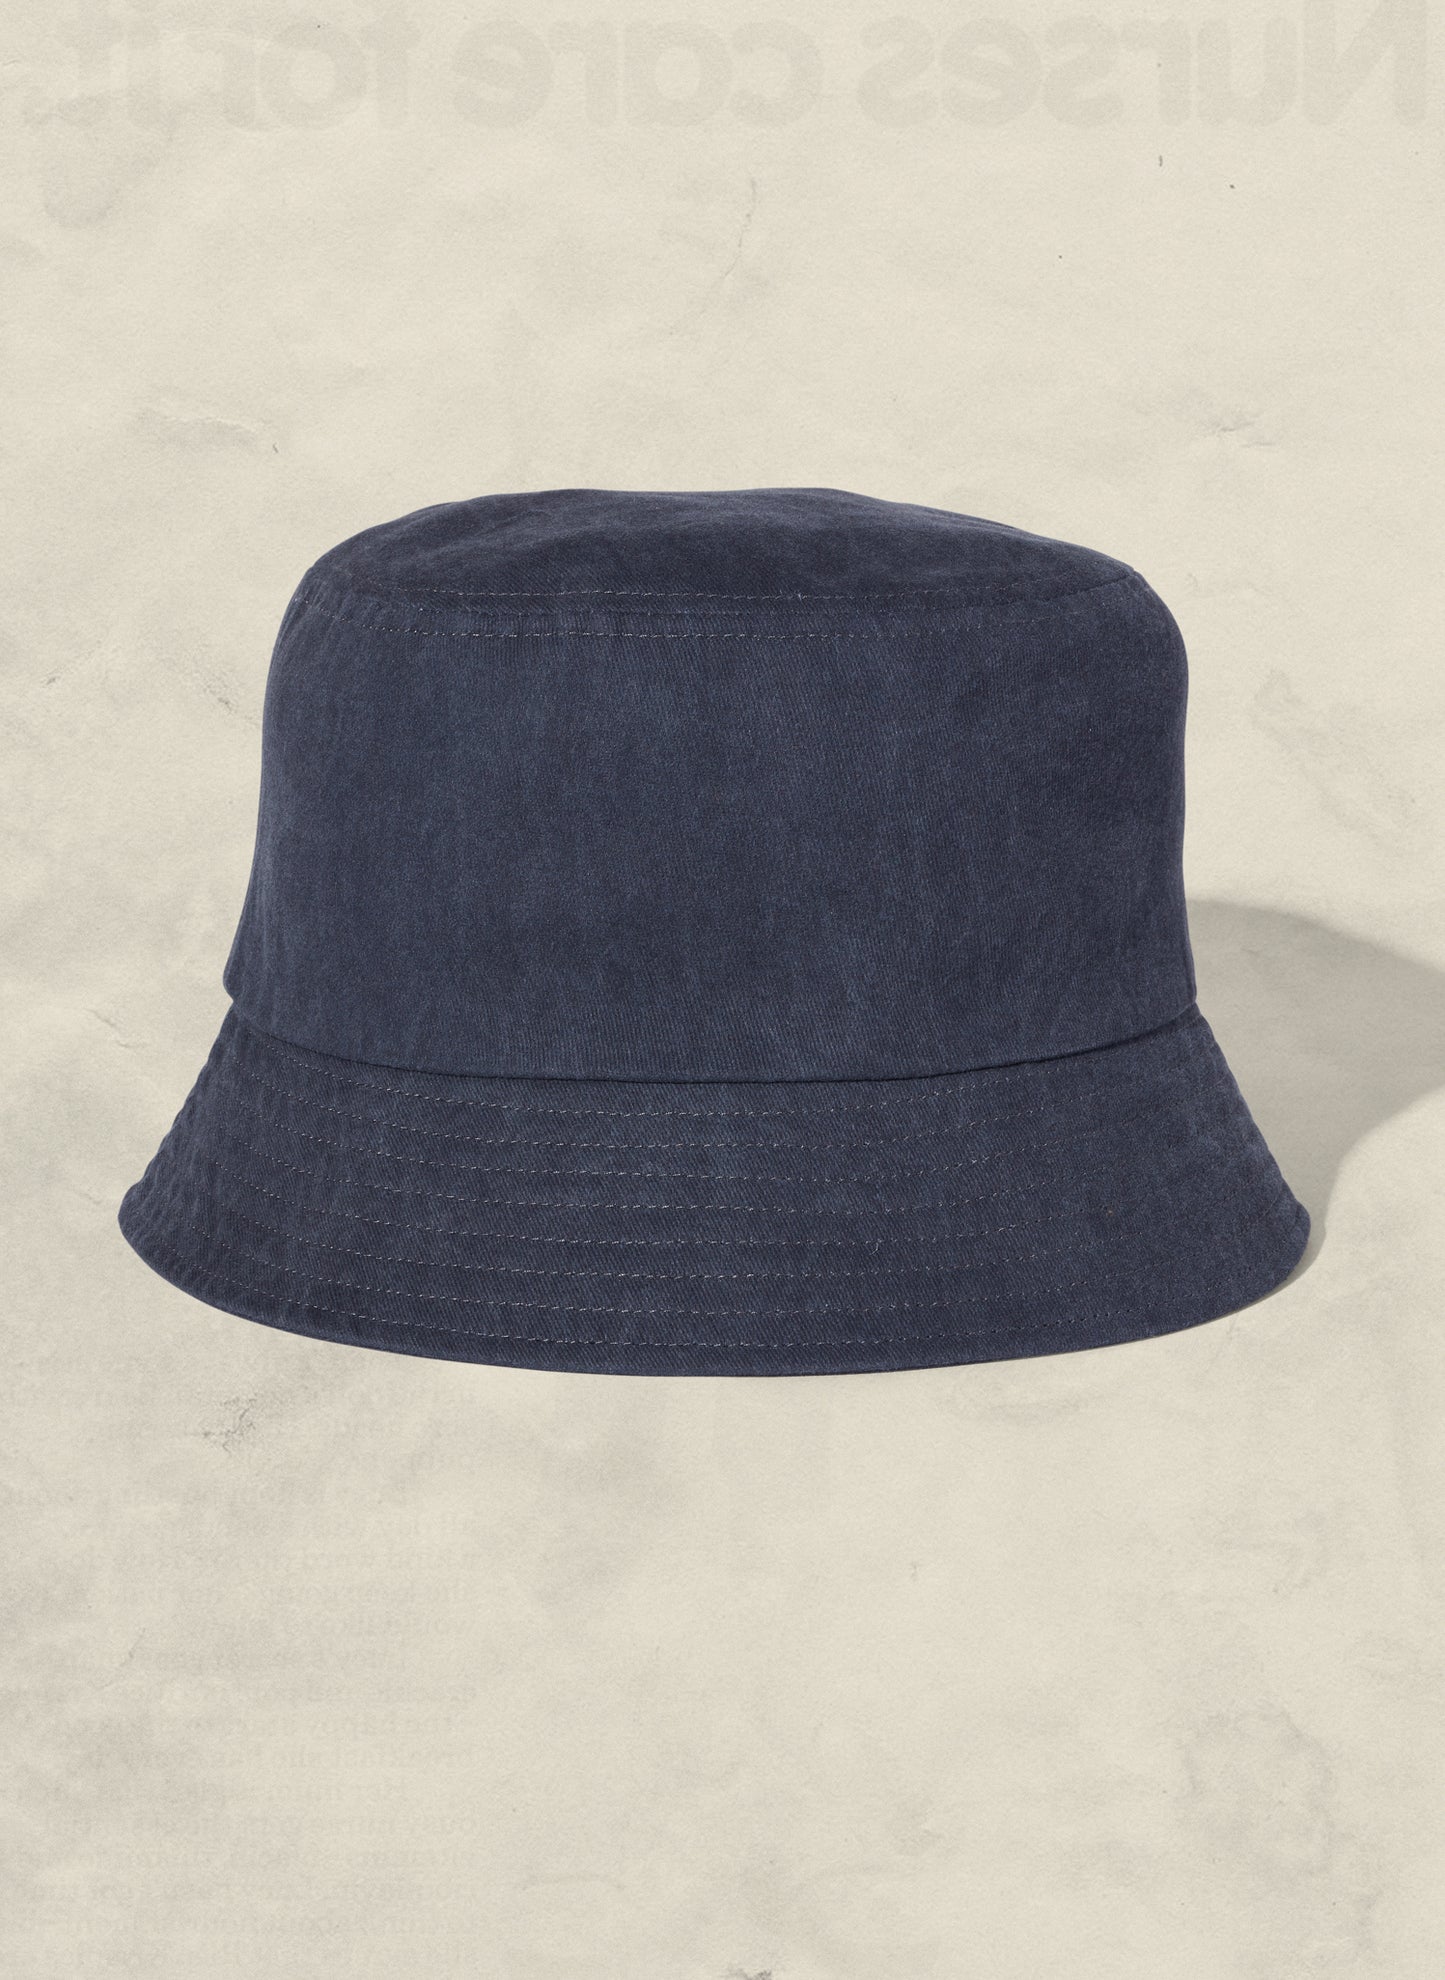 Vintage Washed Brushed Cotton Twill Bucket Hat by Weld Mfg. Earthy Color Wholesale Blank Hats for Creative Brands and Companies.